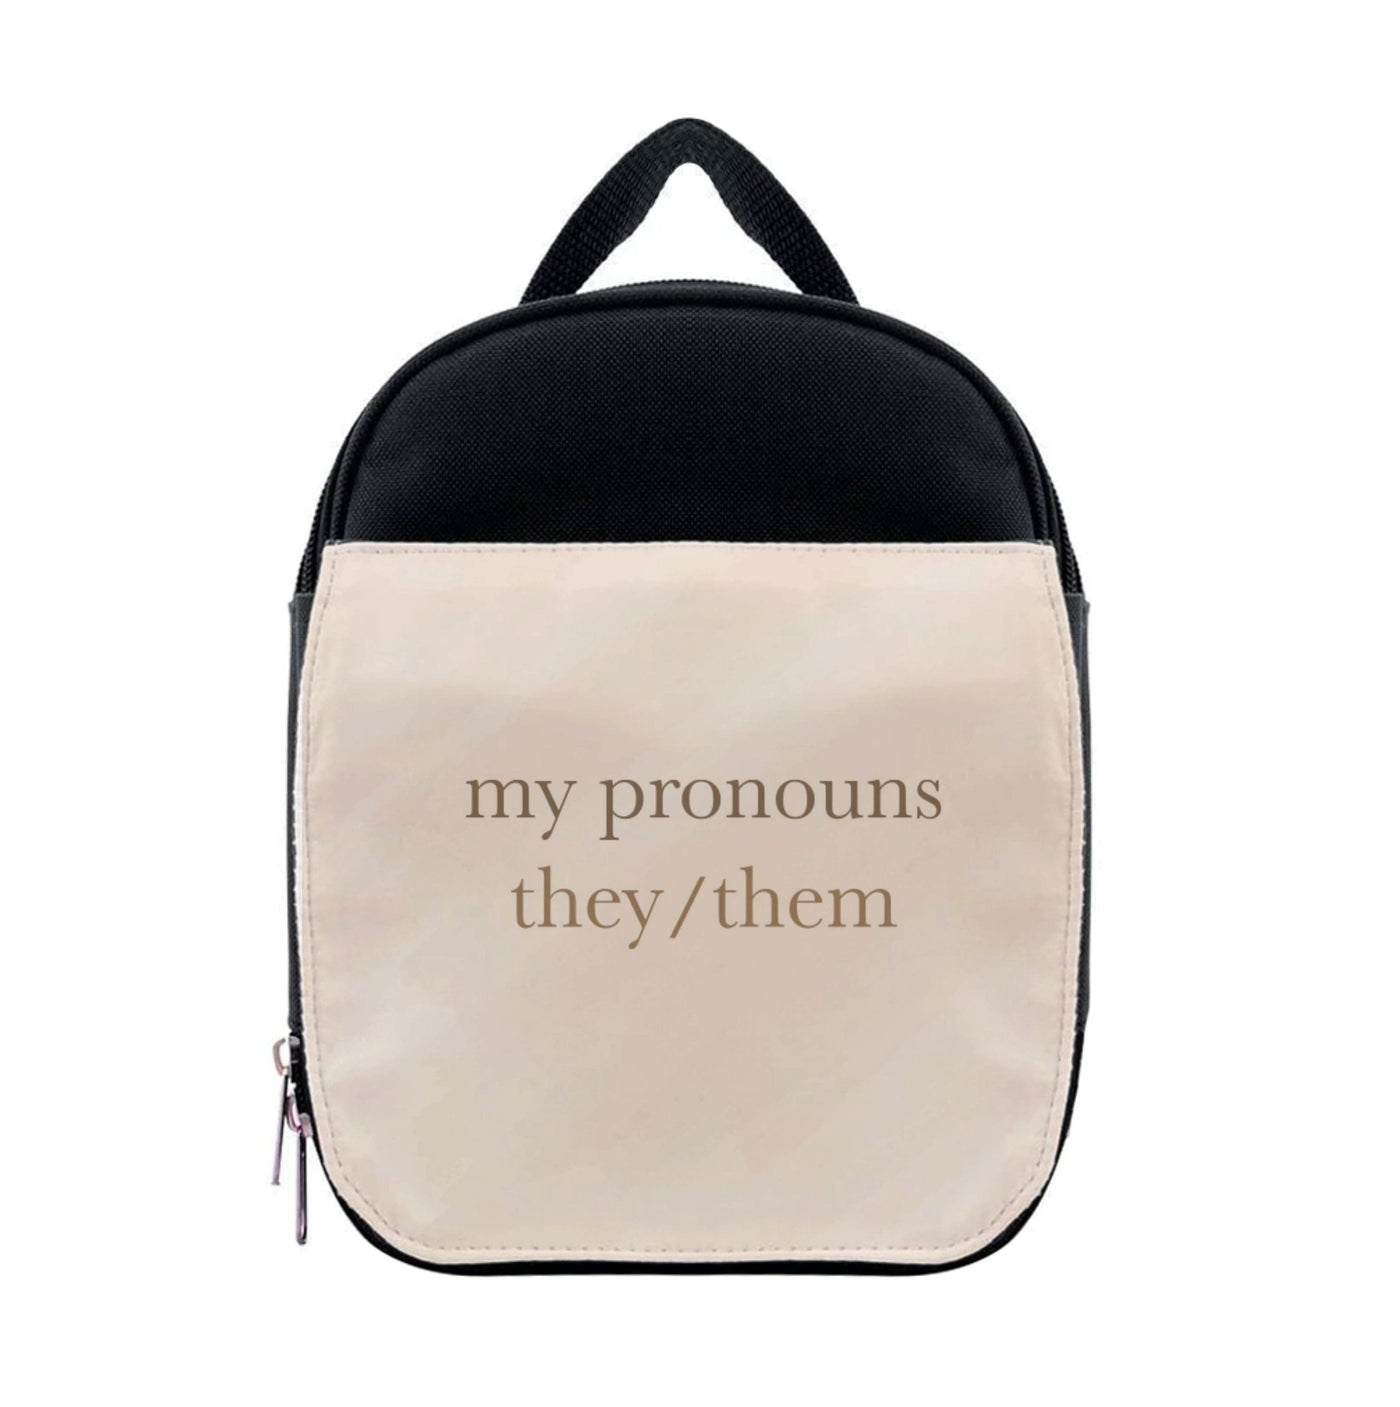 They & Them - Pronouns Lunchbox